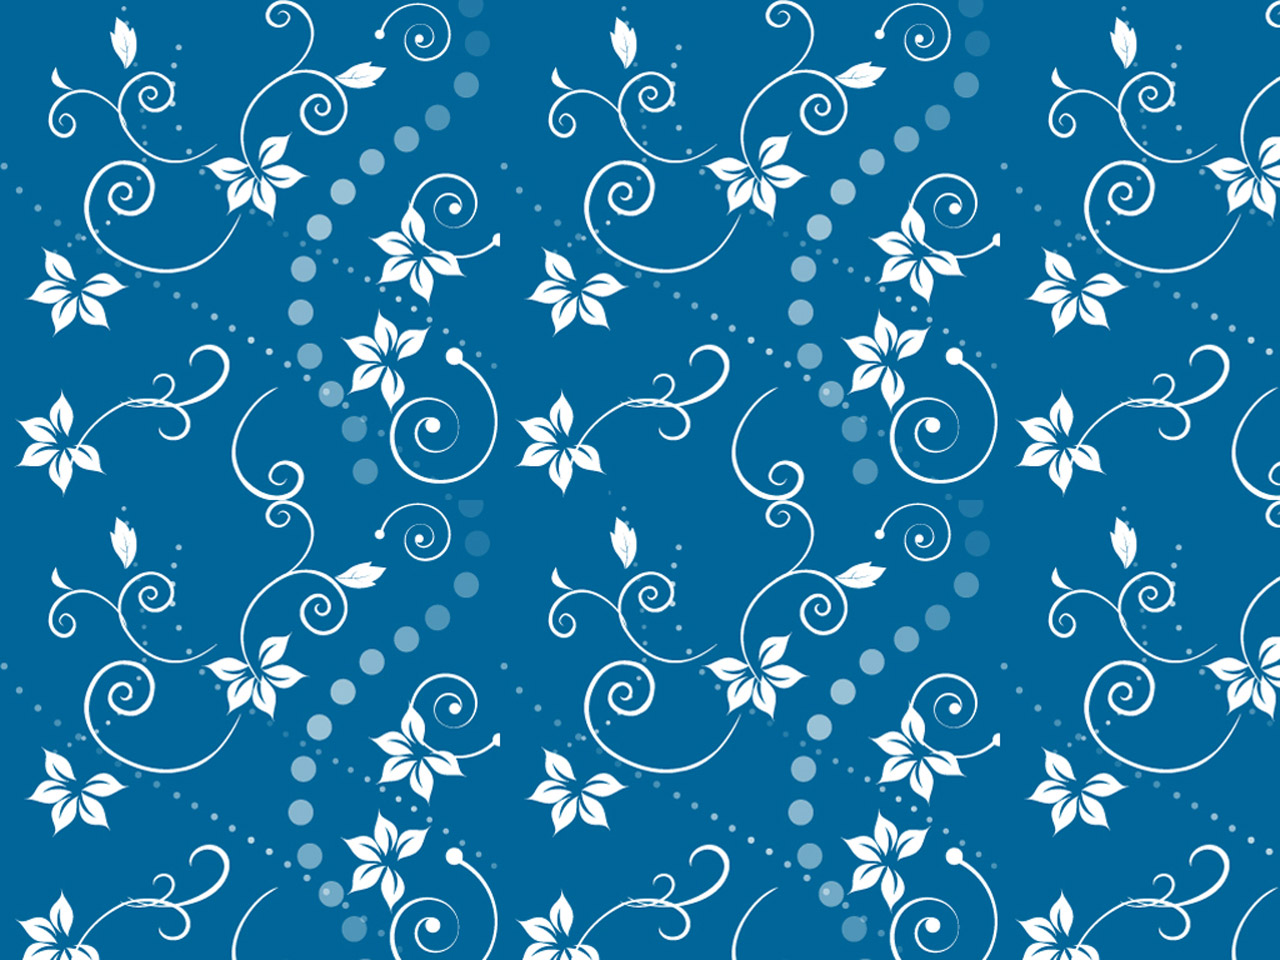 a dark blue background with light blue and white swirls and flowers